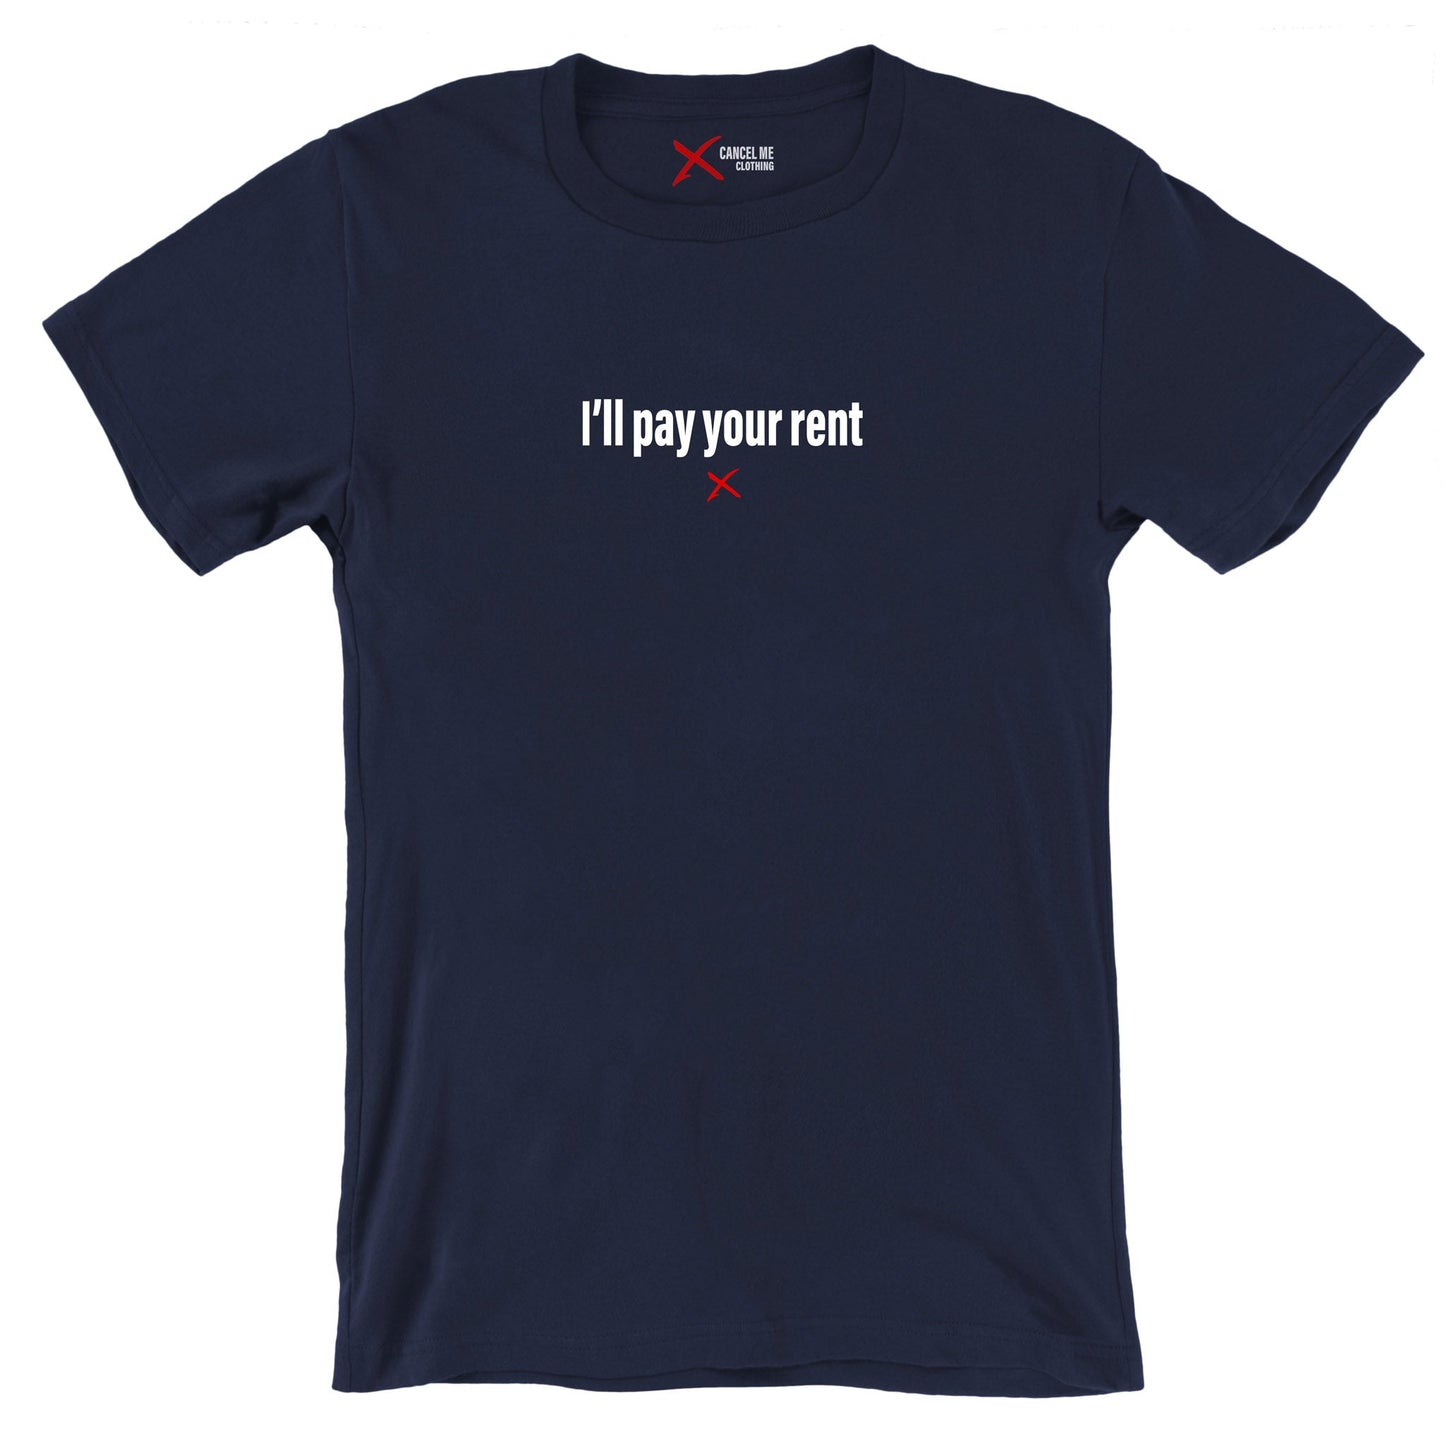 I'll pay your rent - Shirt